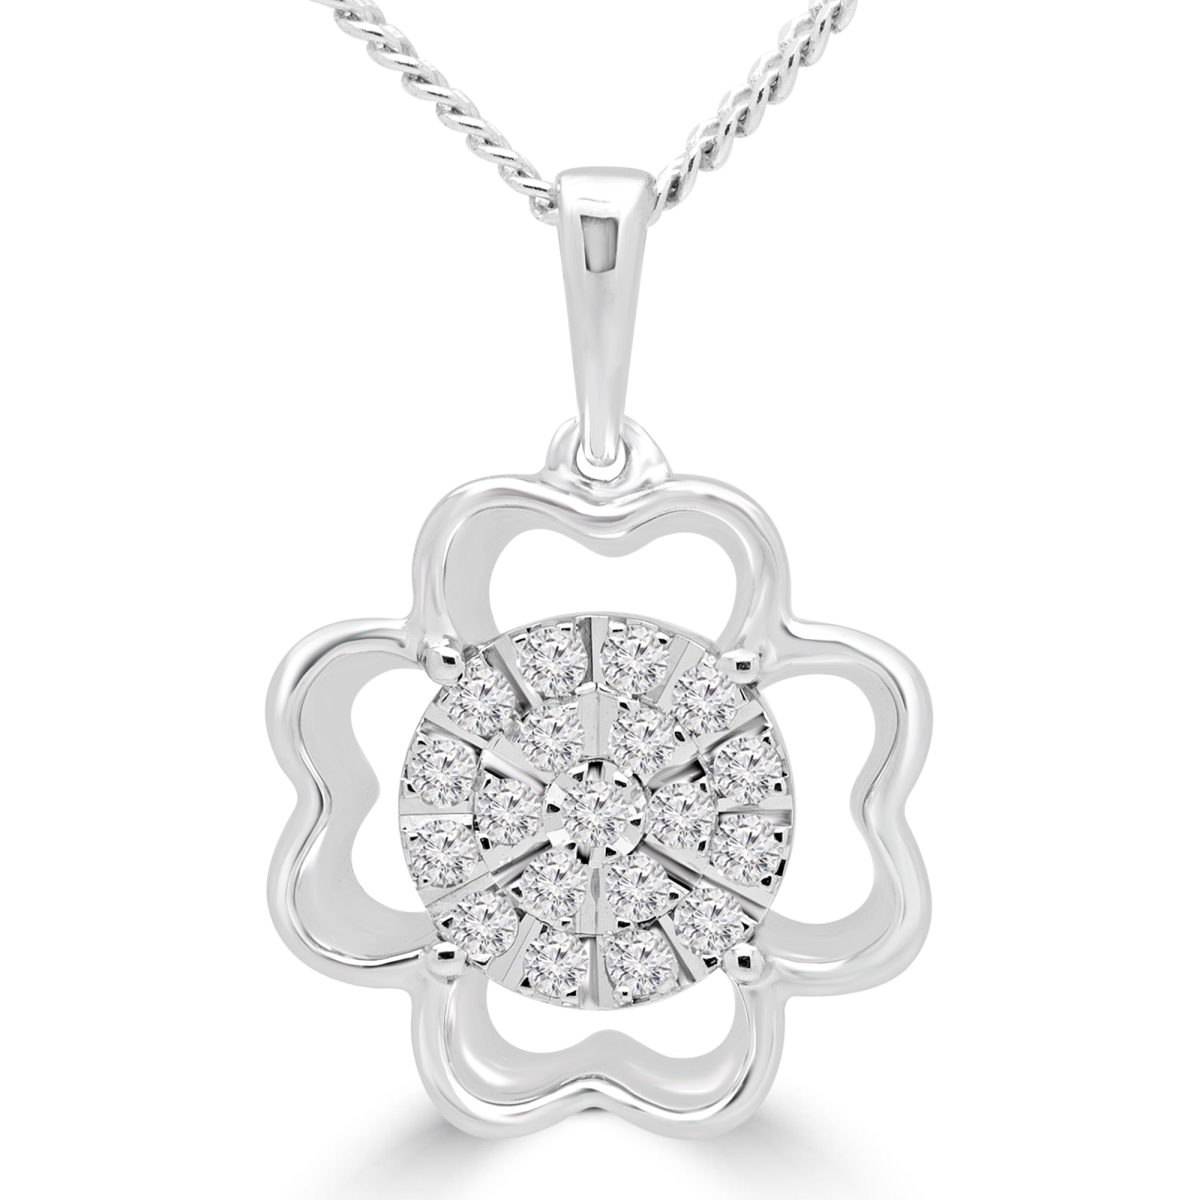 MDR180023 0.14 CTW Round Diamond Floral Motif Cluster Pendant Necklace in 10K White Gold With Chain -  Majesty Diamonds